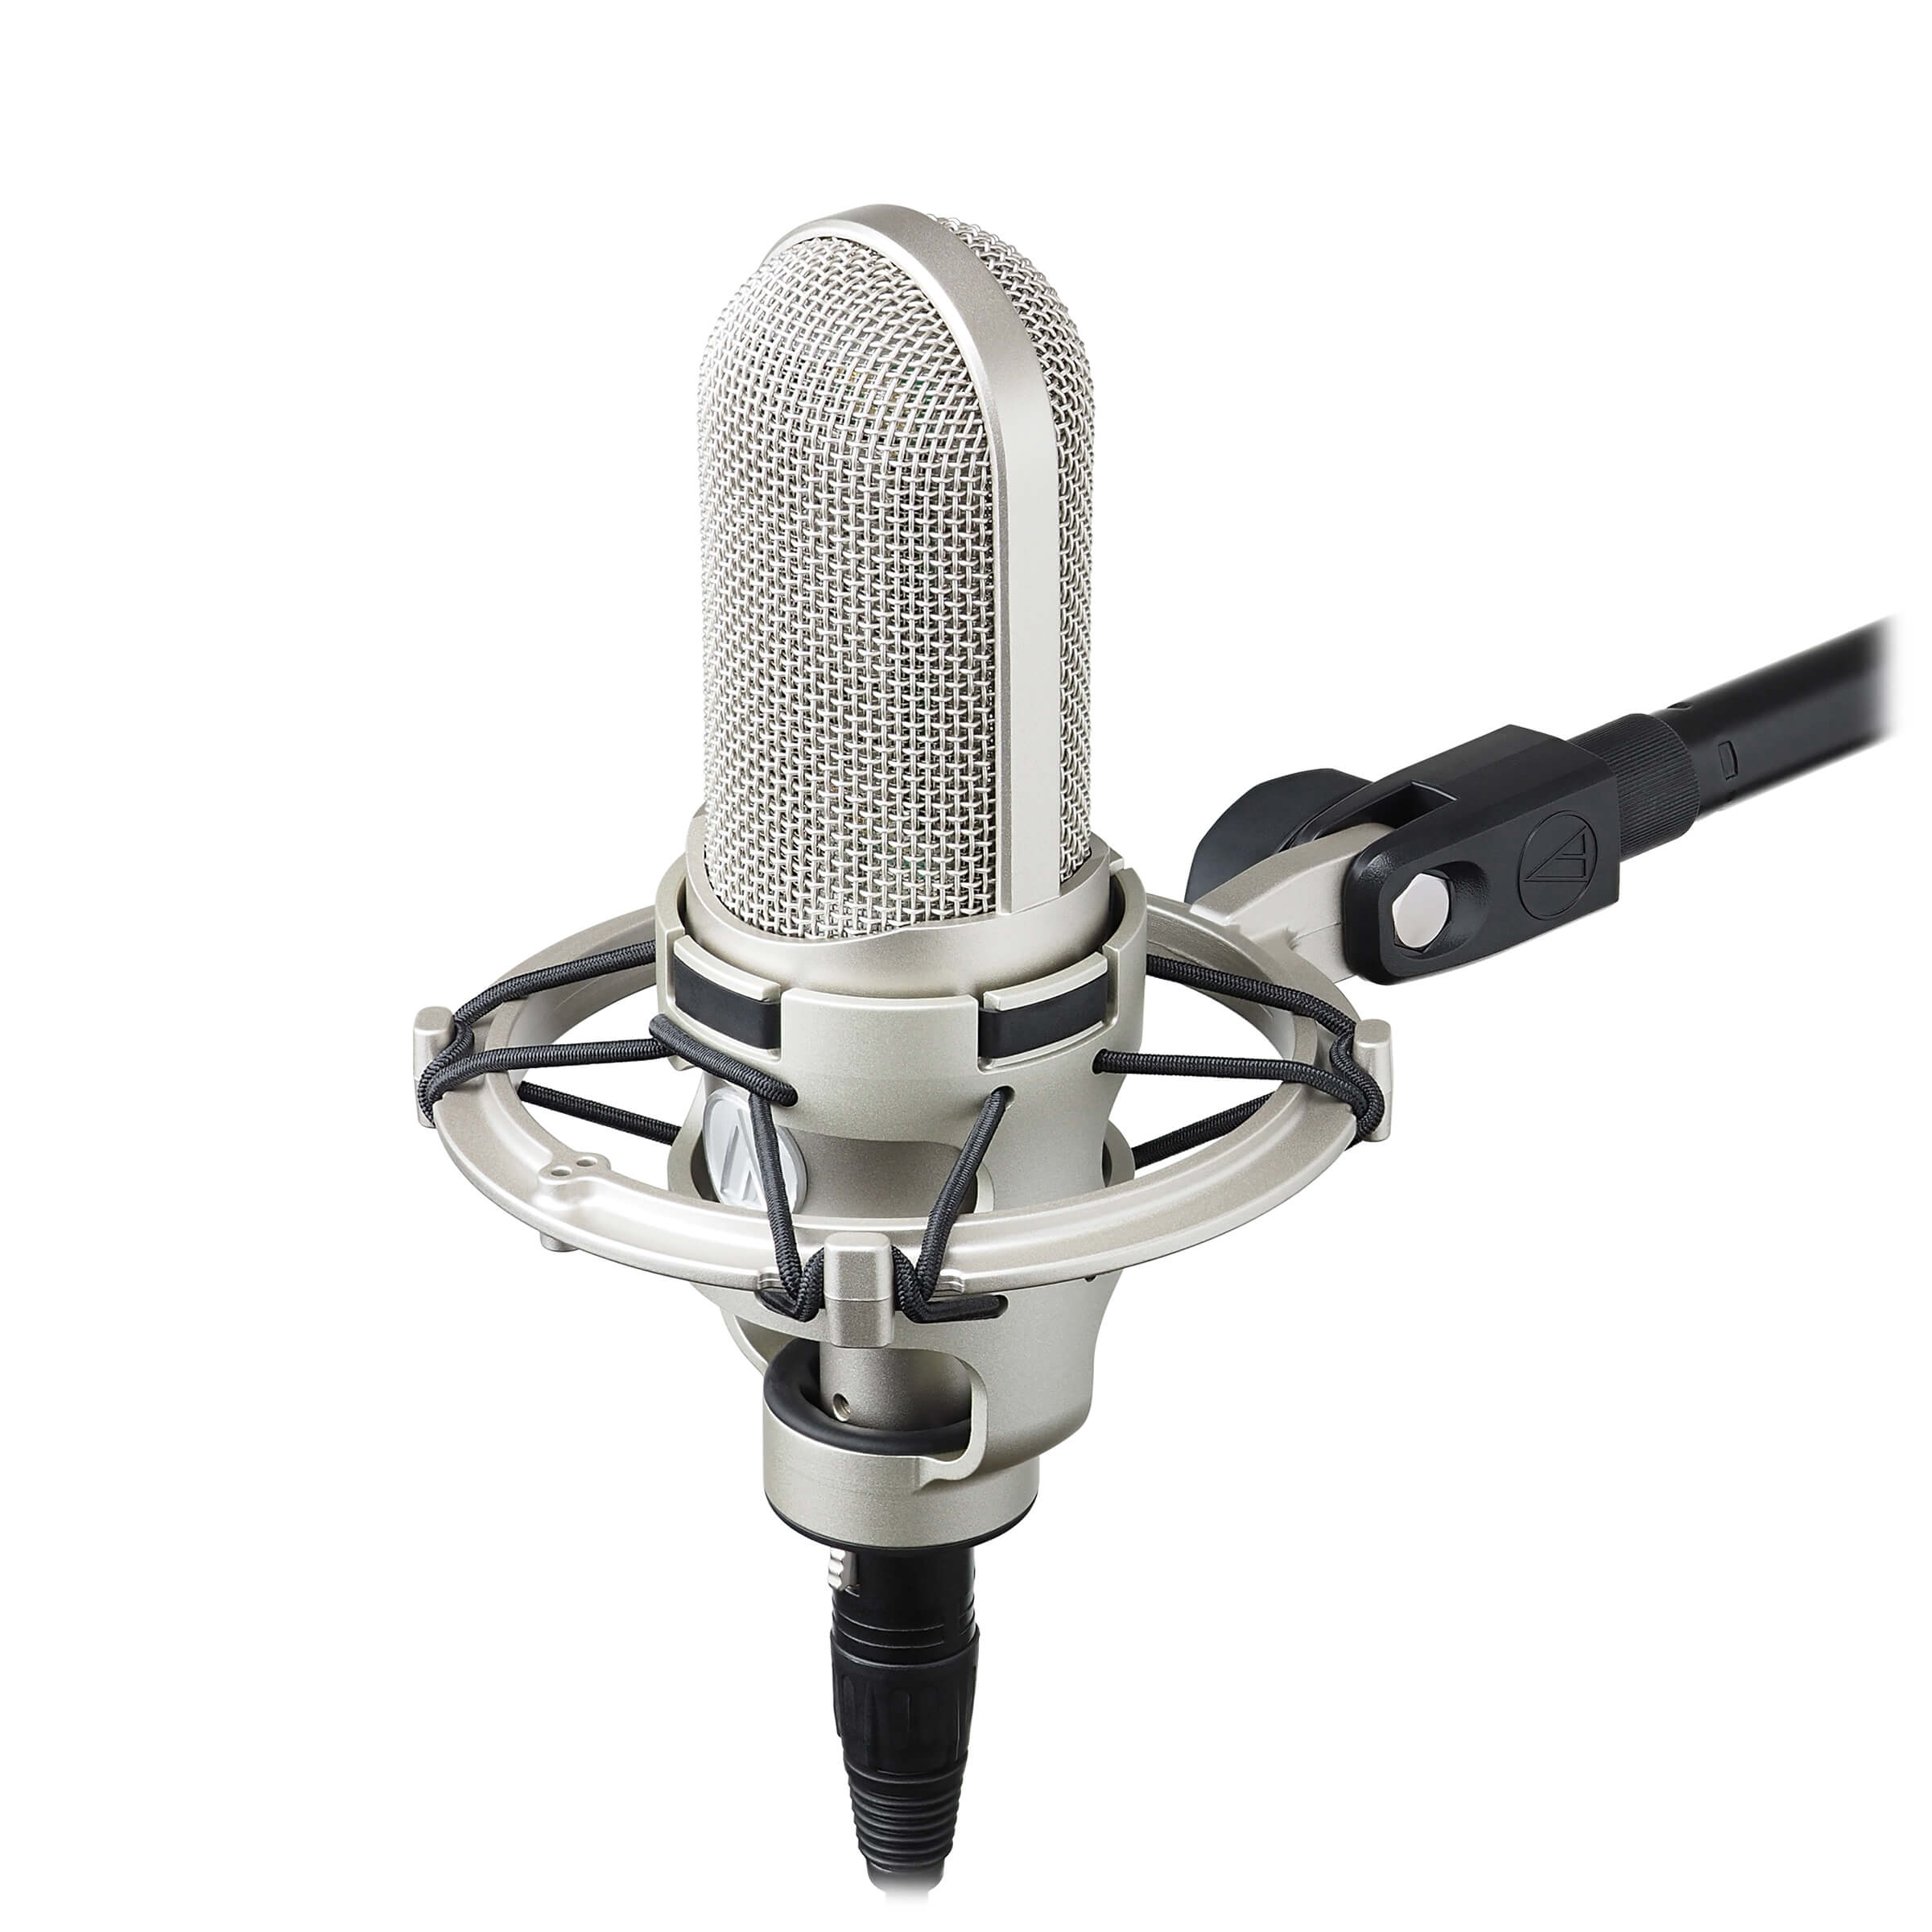 Microphone Basics for Podcasting